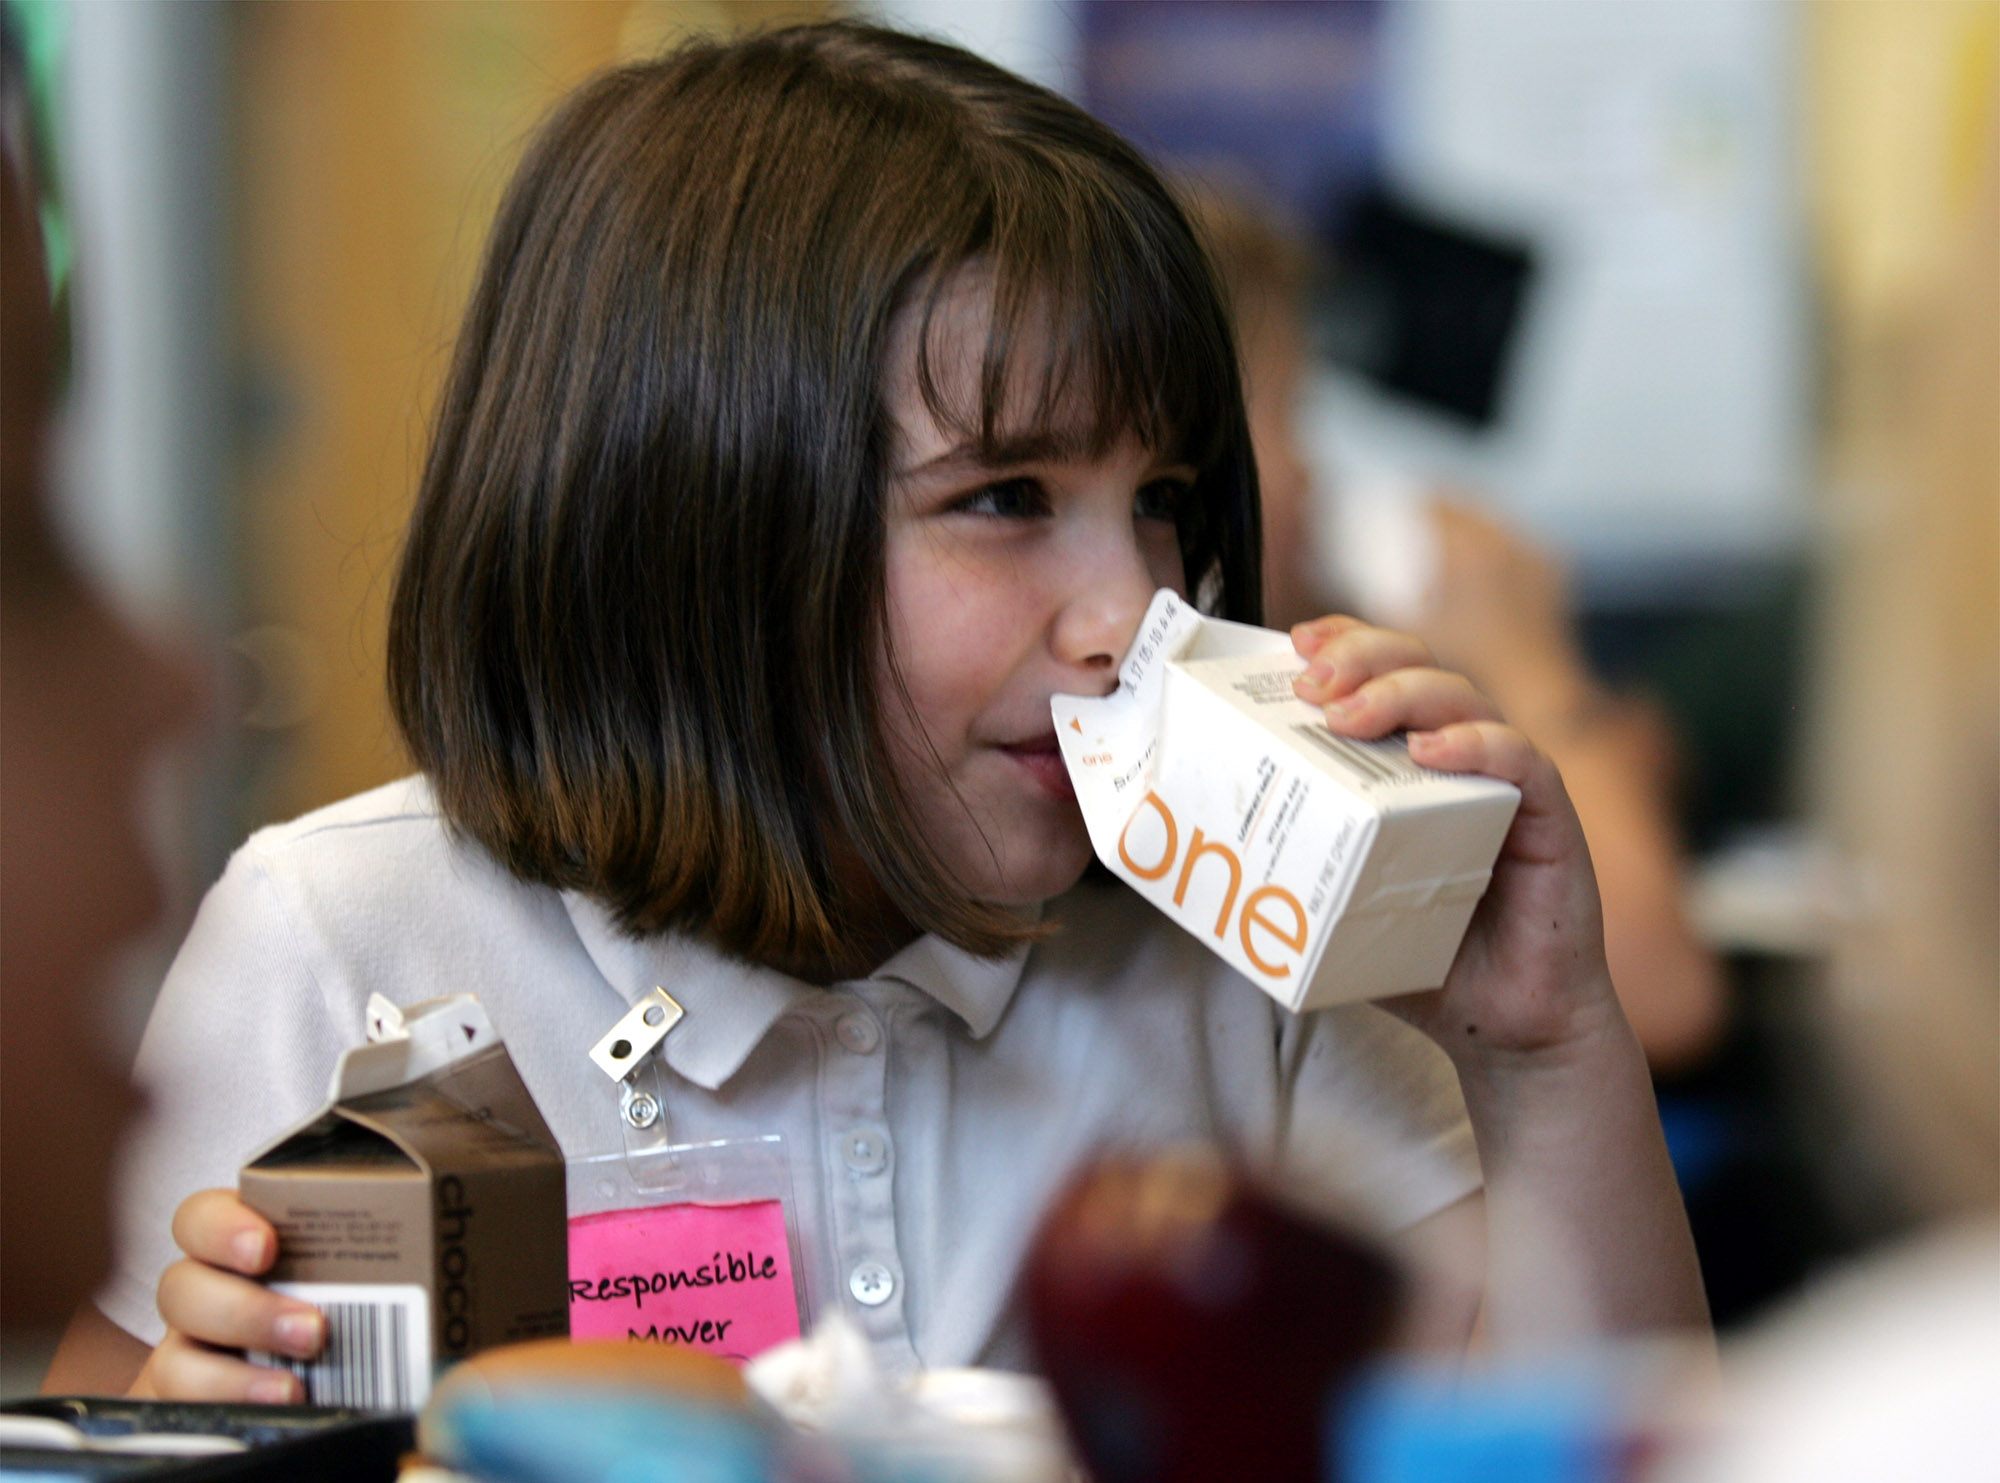 child drinks from containers of one percent milk